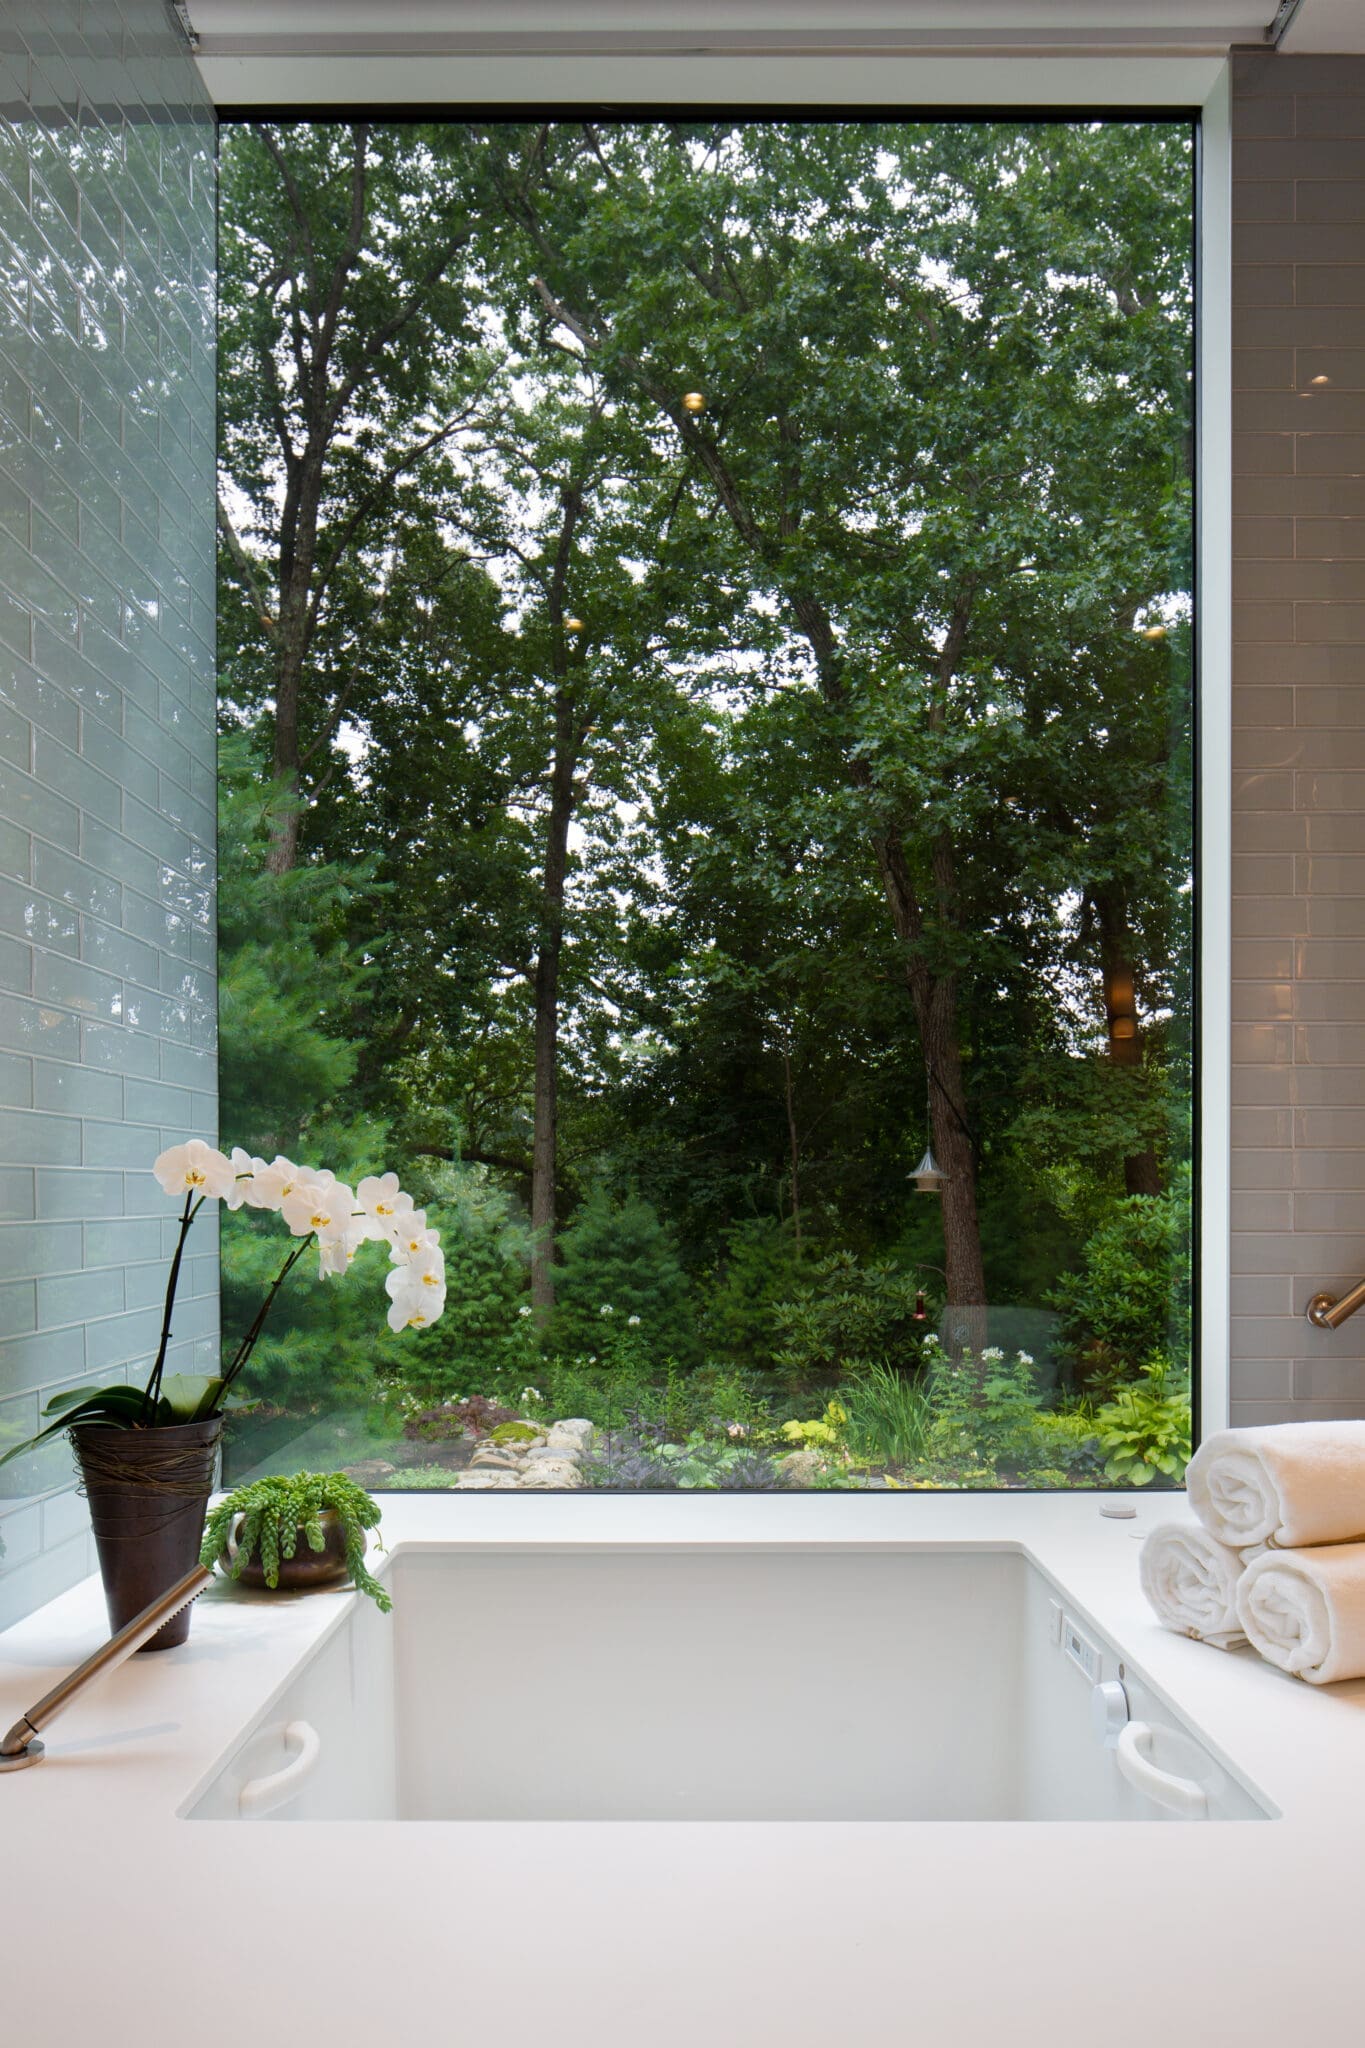 A photo of a deep, square-shaped tub with a thick wrap-around edge. Behind the tub is a large window looking out to the woods.